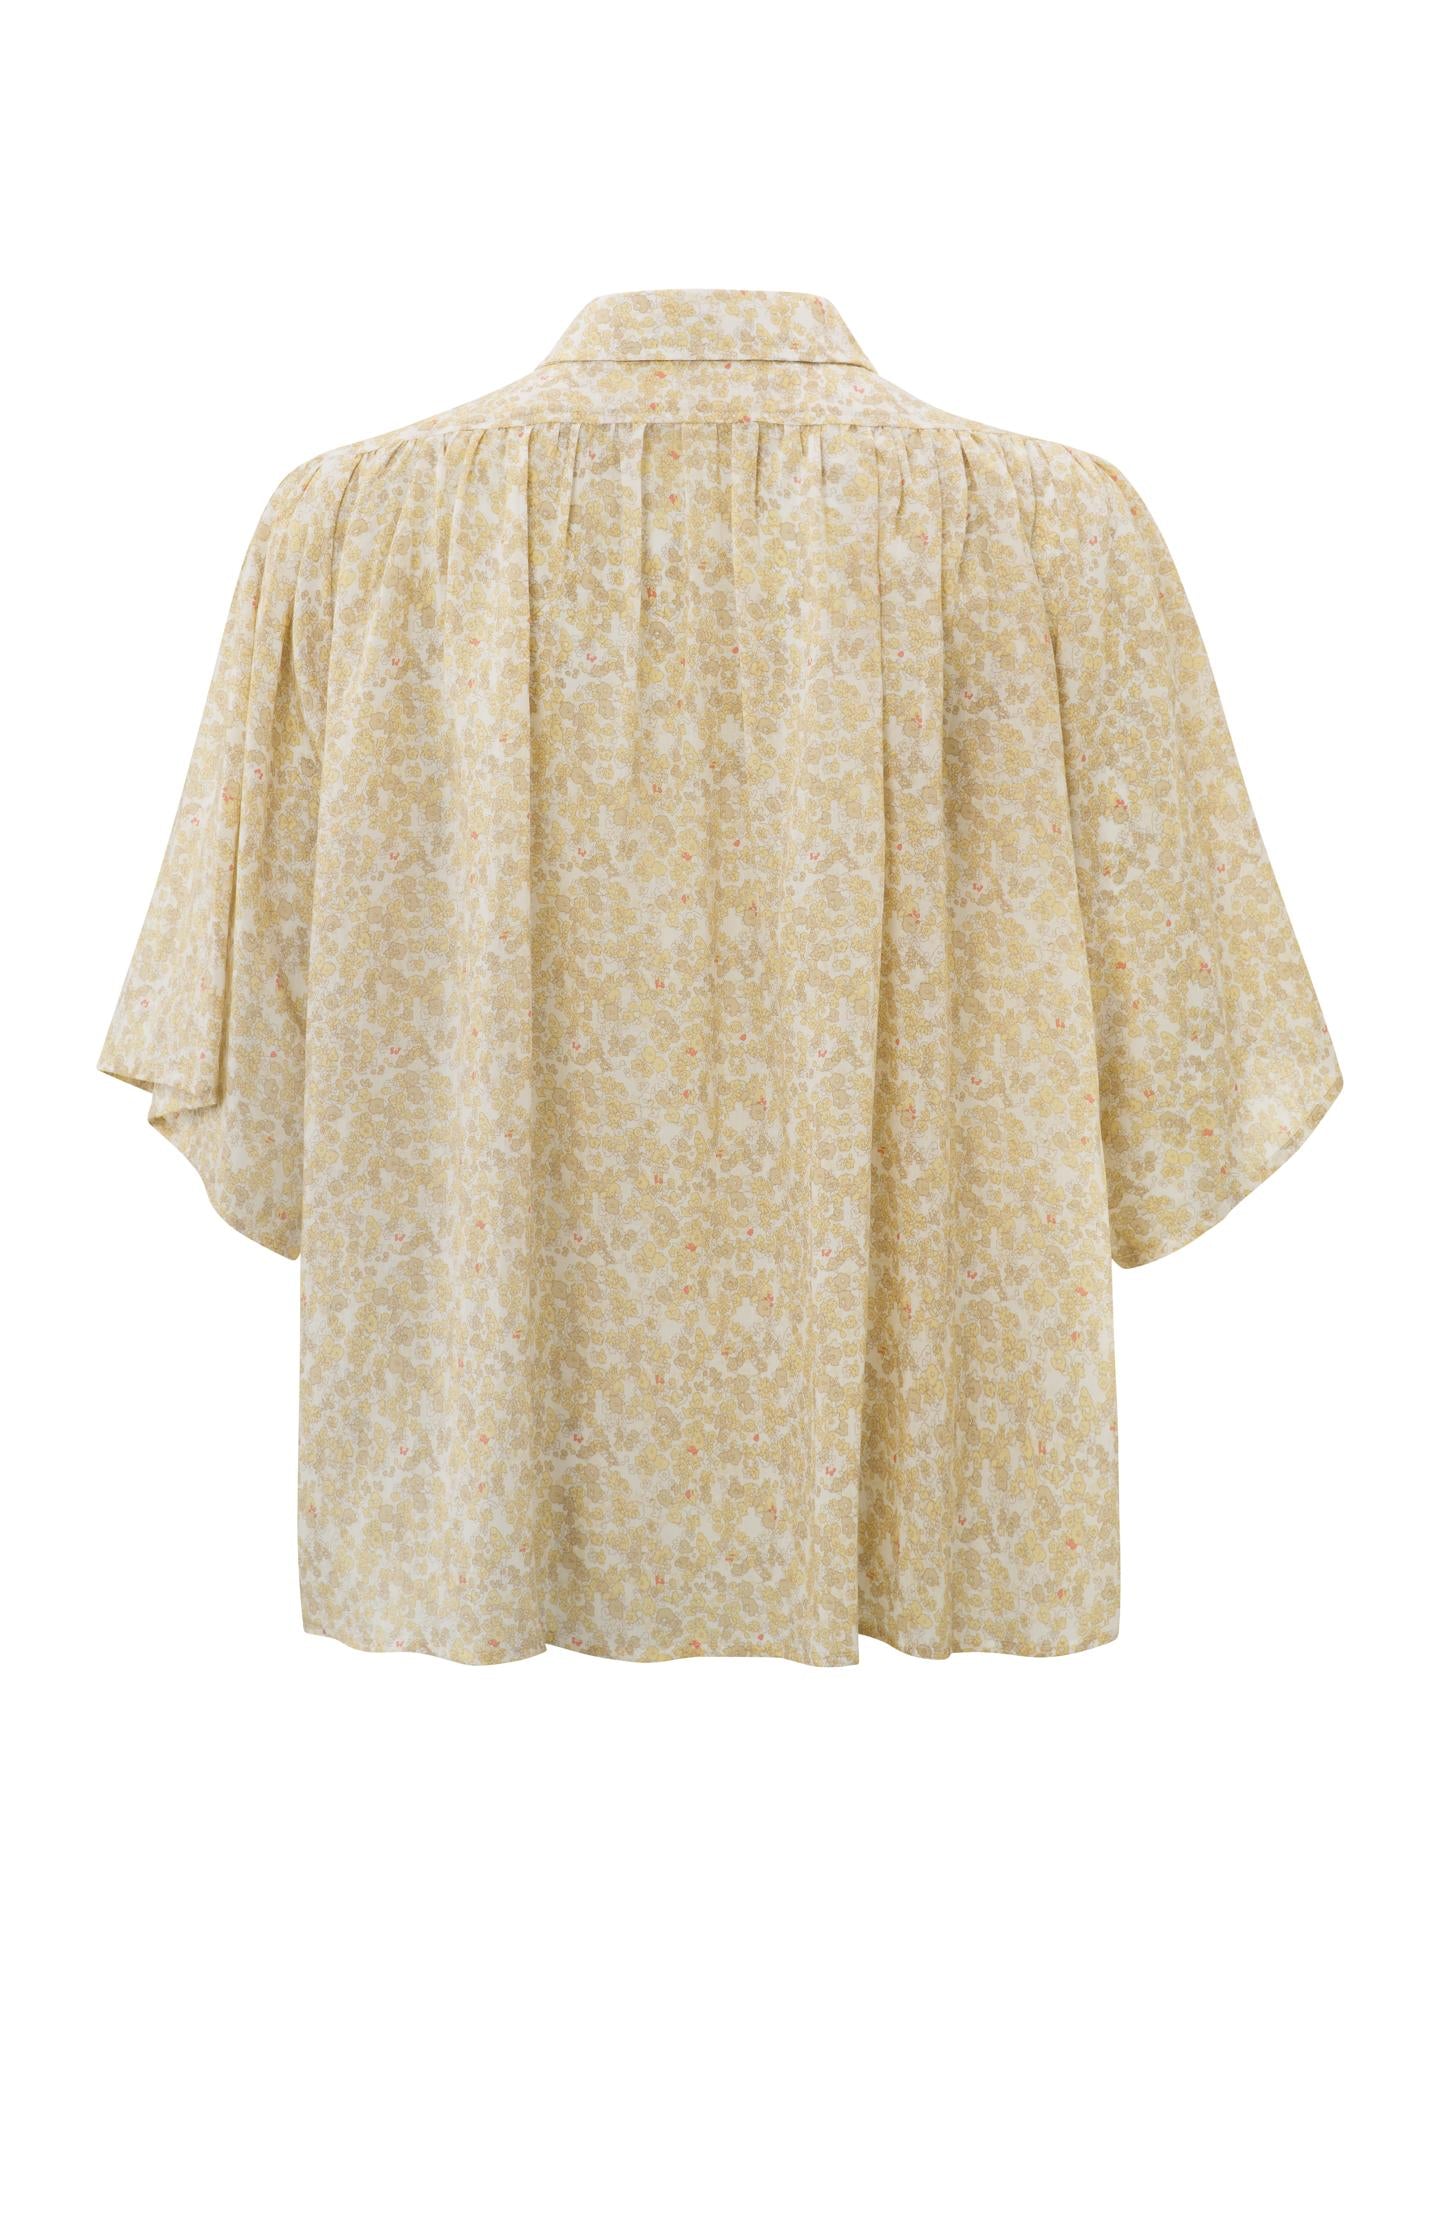 Oversized blouse with mid-length pleated and floral print